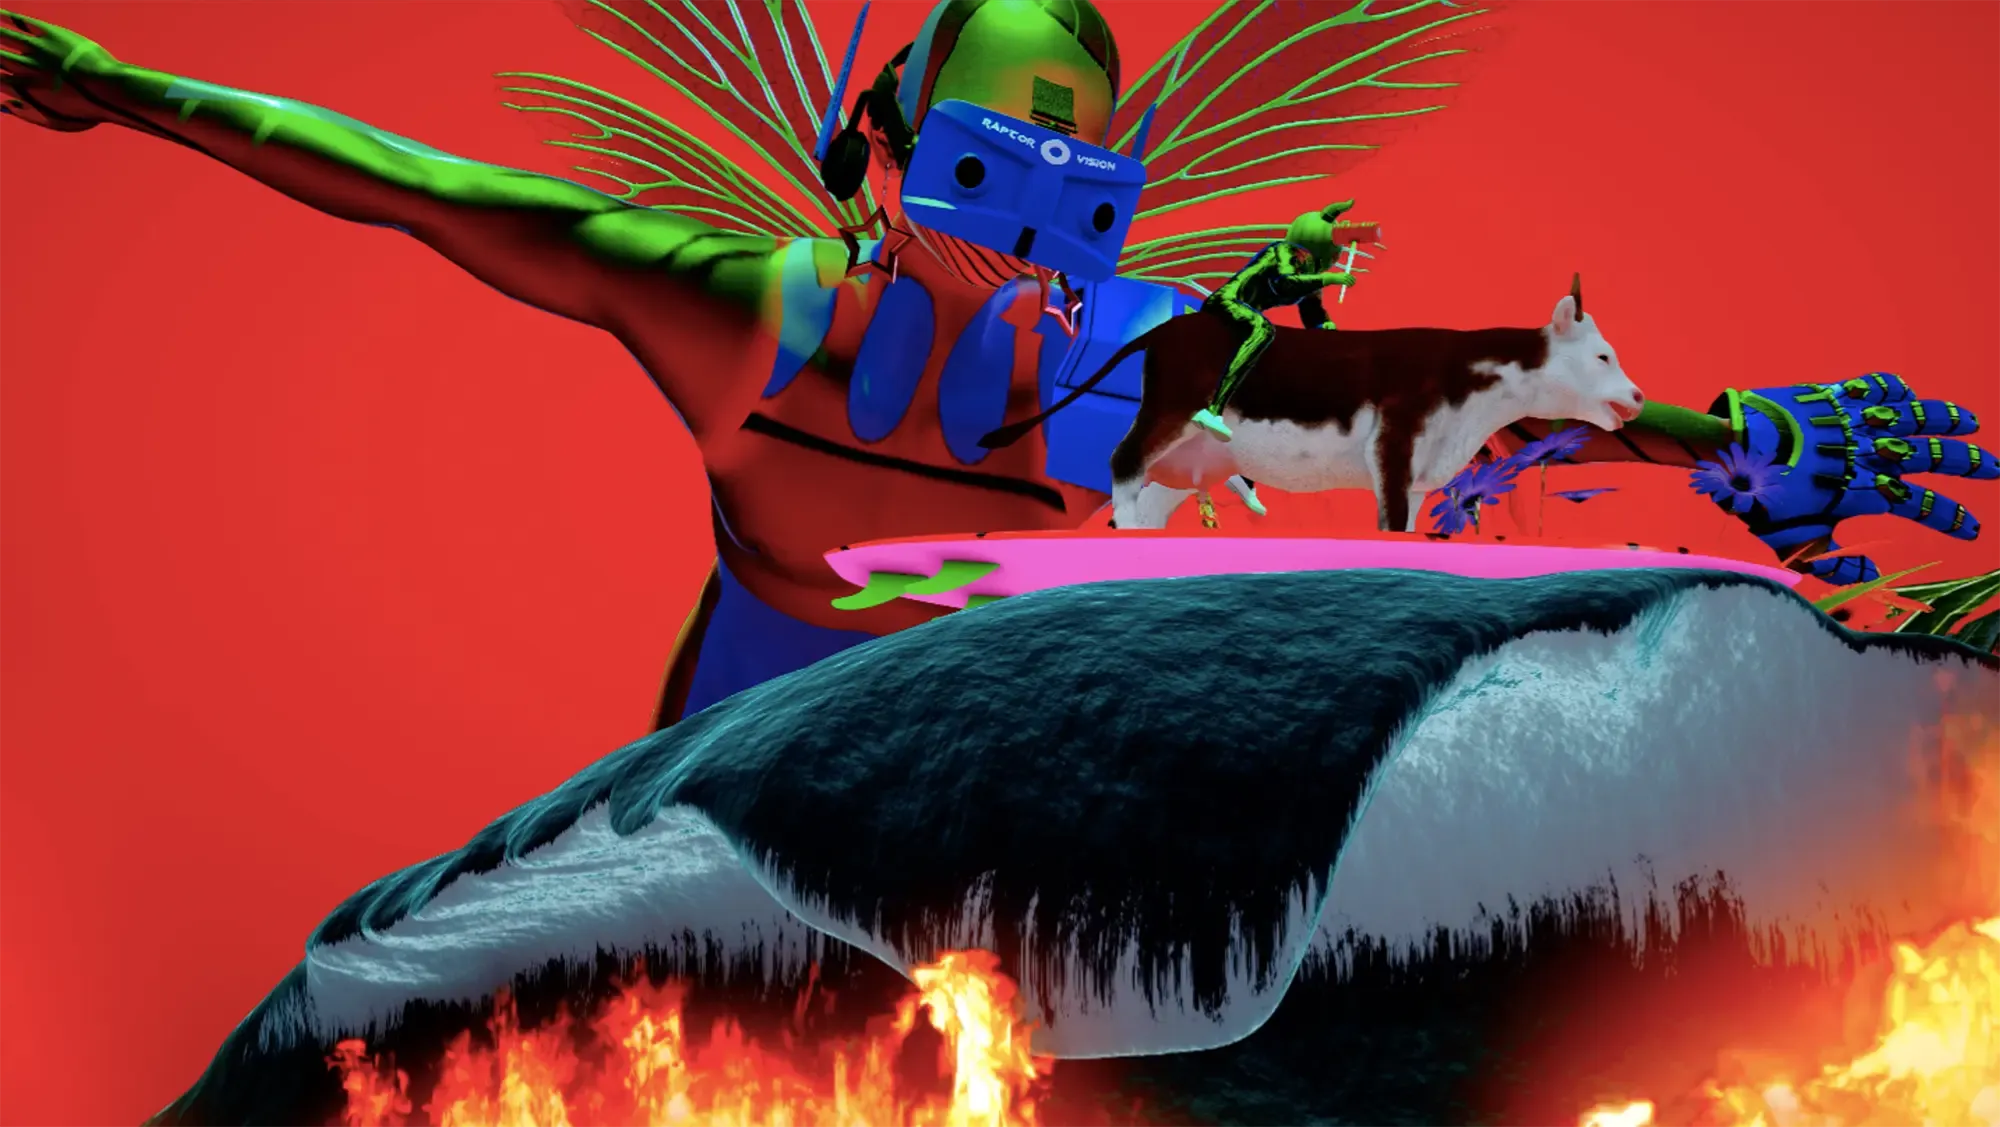 vivid digital artwork zagreus 2023 by heavenly peach banquet featuring a futuristic figure with green and red limbs wearing VR goggles labeled raptor vision holding a miniature cow and a smaller figure riding it set against a solid red background with blue flames dye sublimated on aluminum exploring themes of technology and surrealism